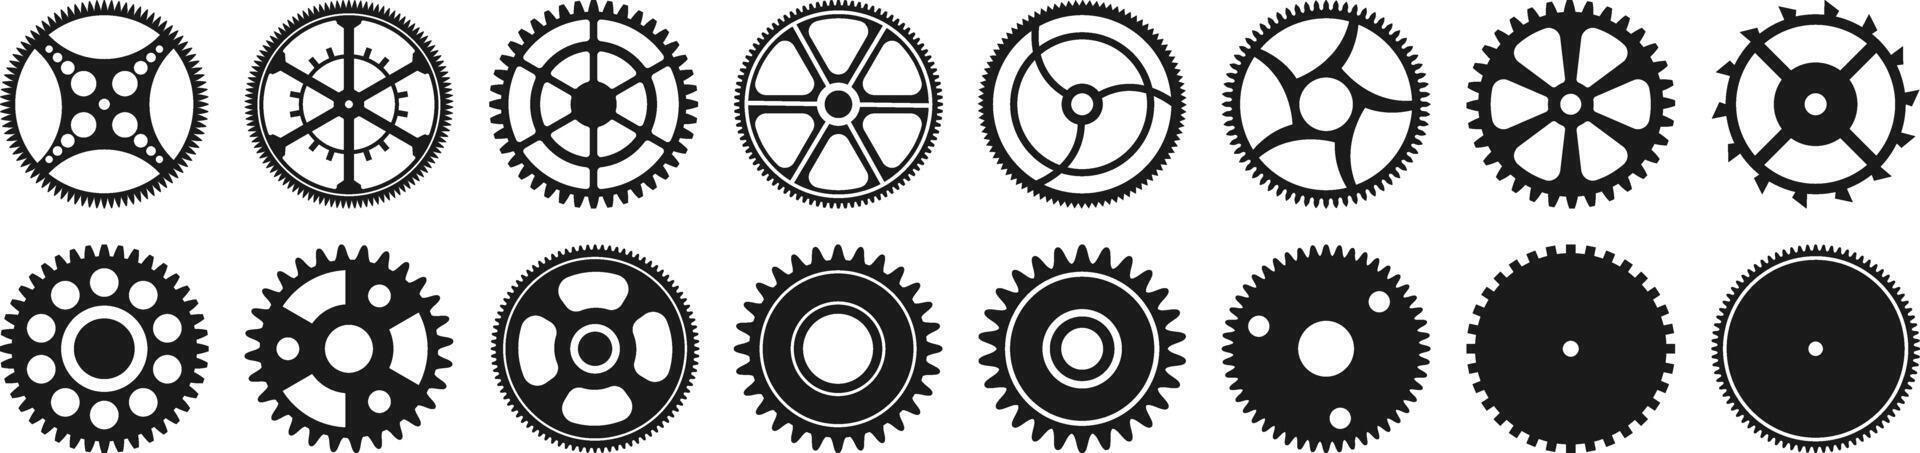 A set of vector icons of gears of various mechanisms and clocks